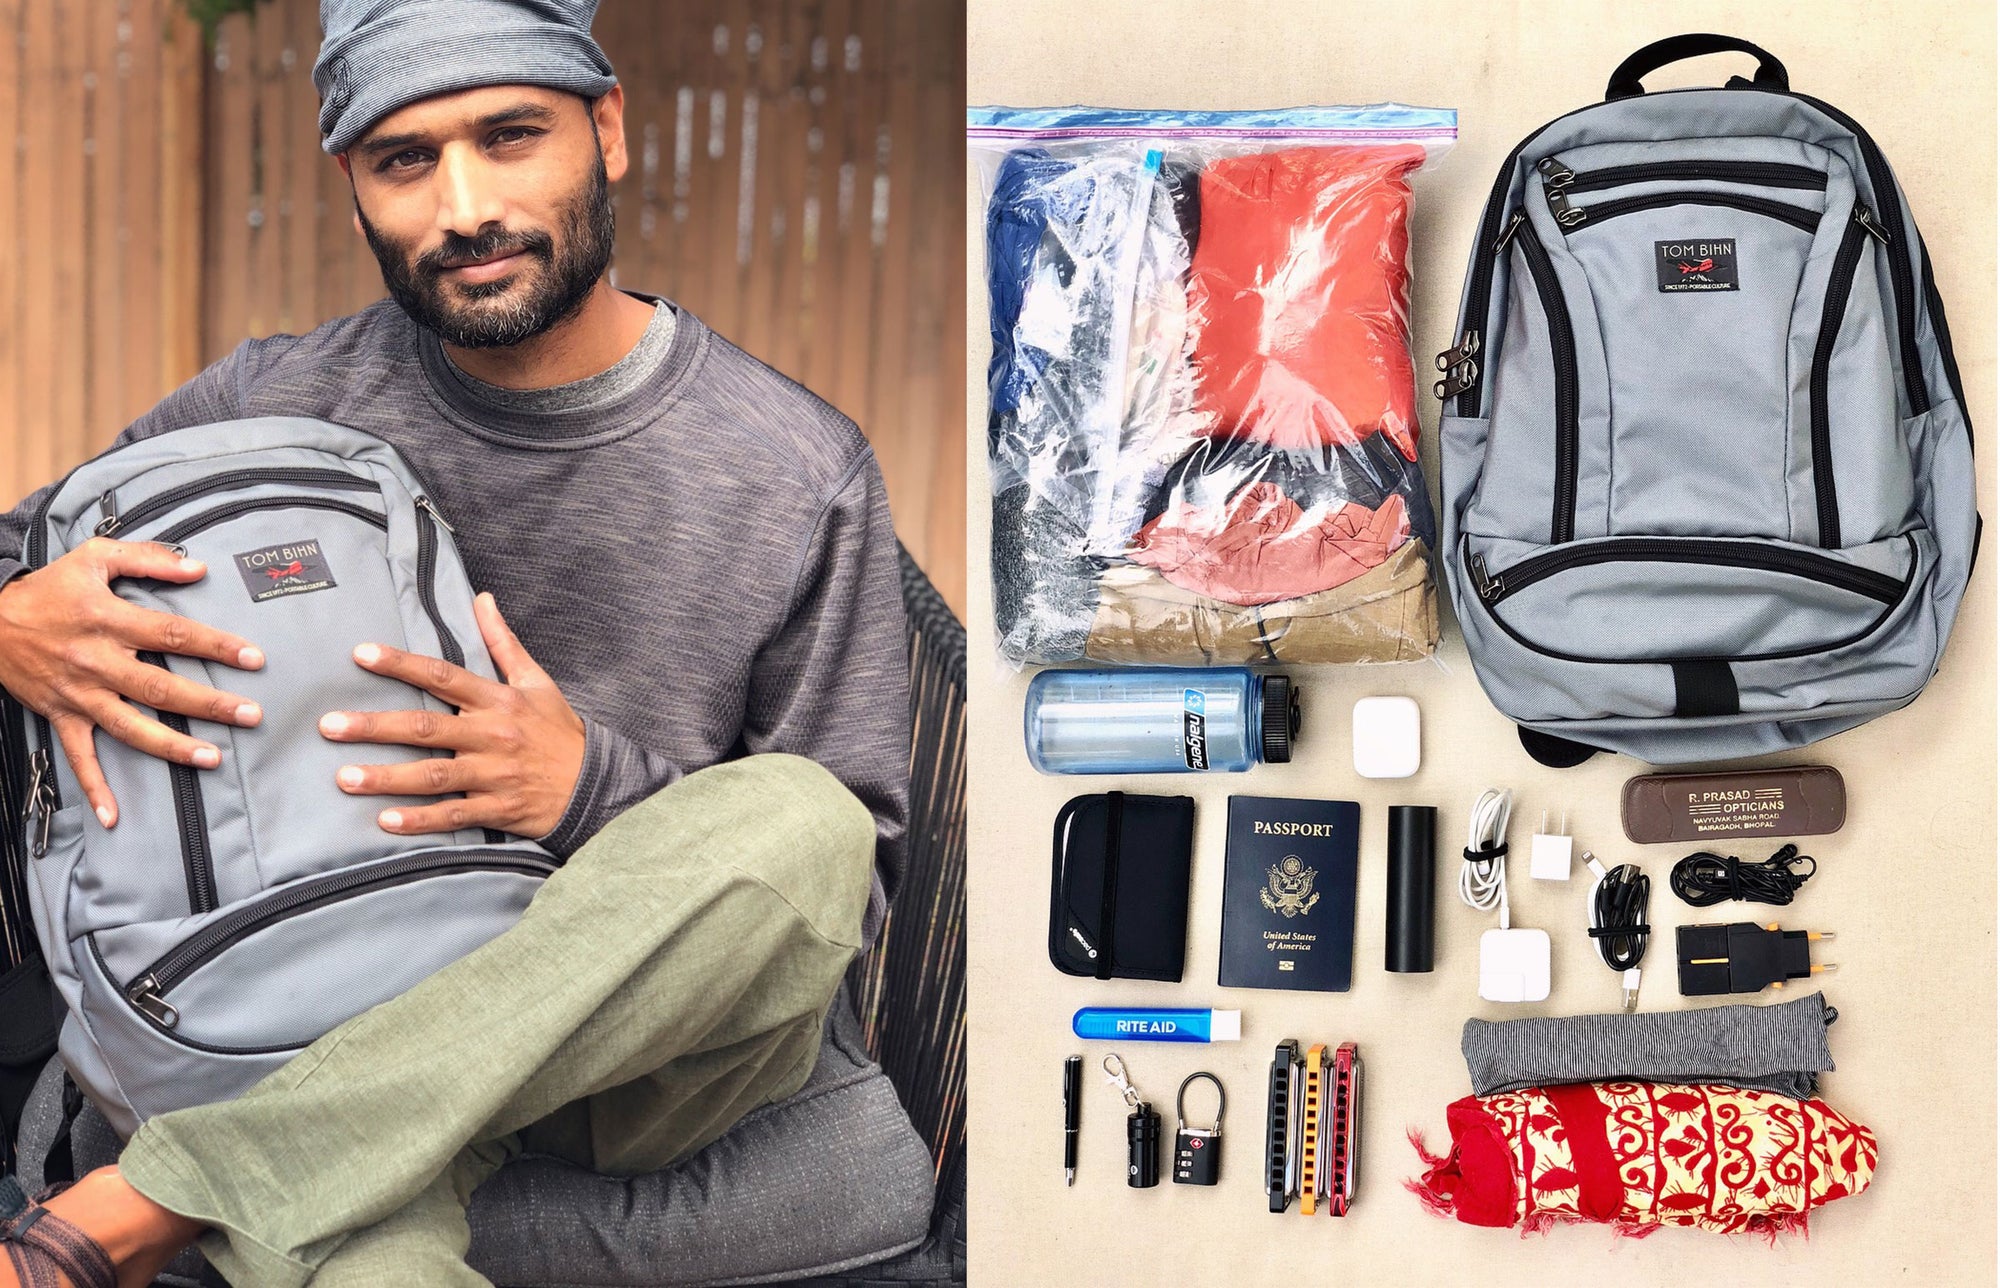 Rishi O. holding his Synapse 19 and what he carries in his bag.